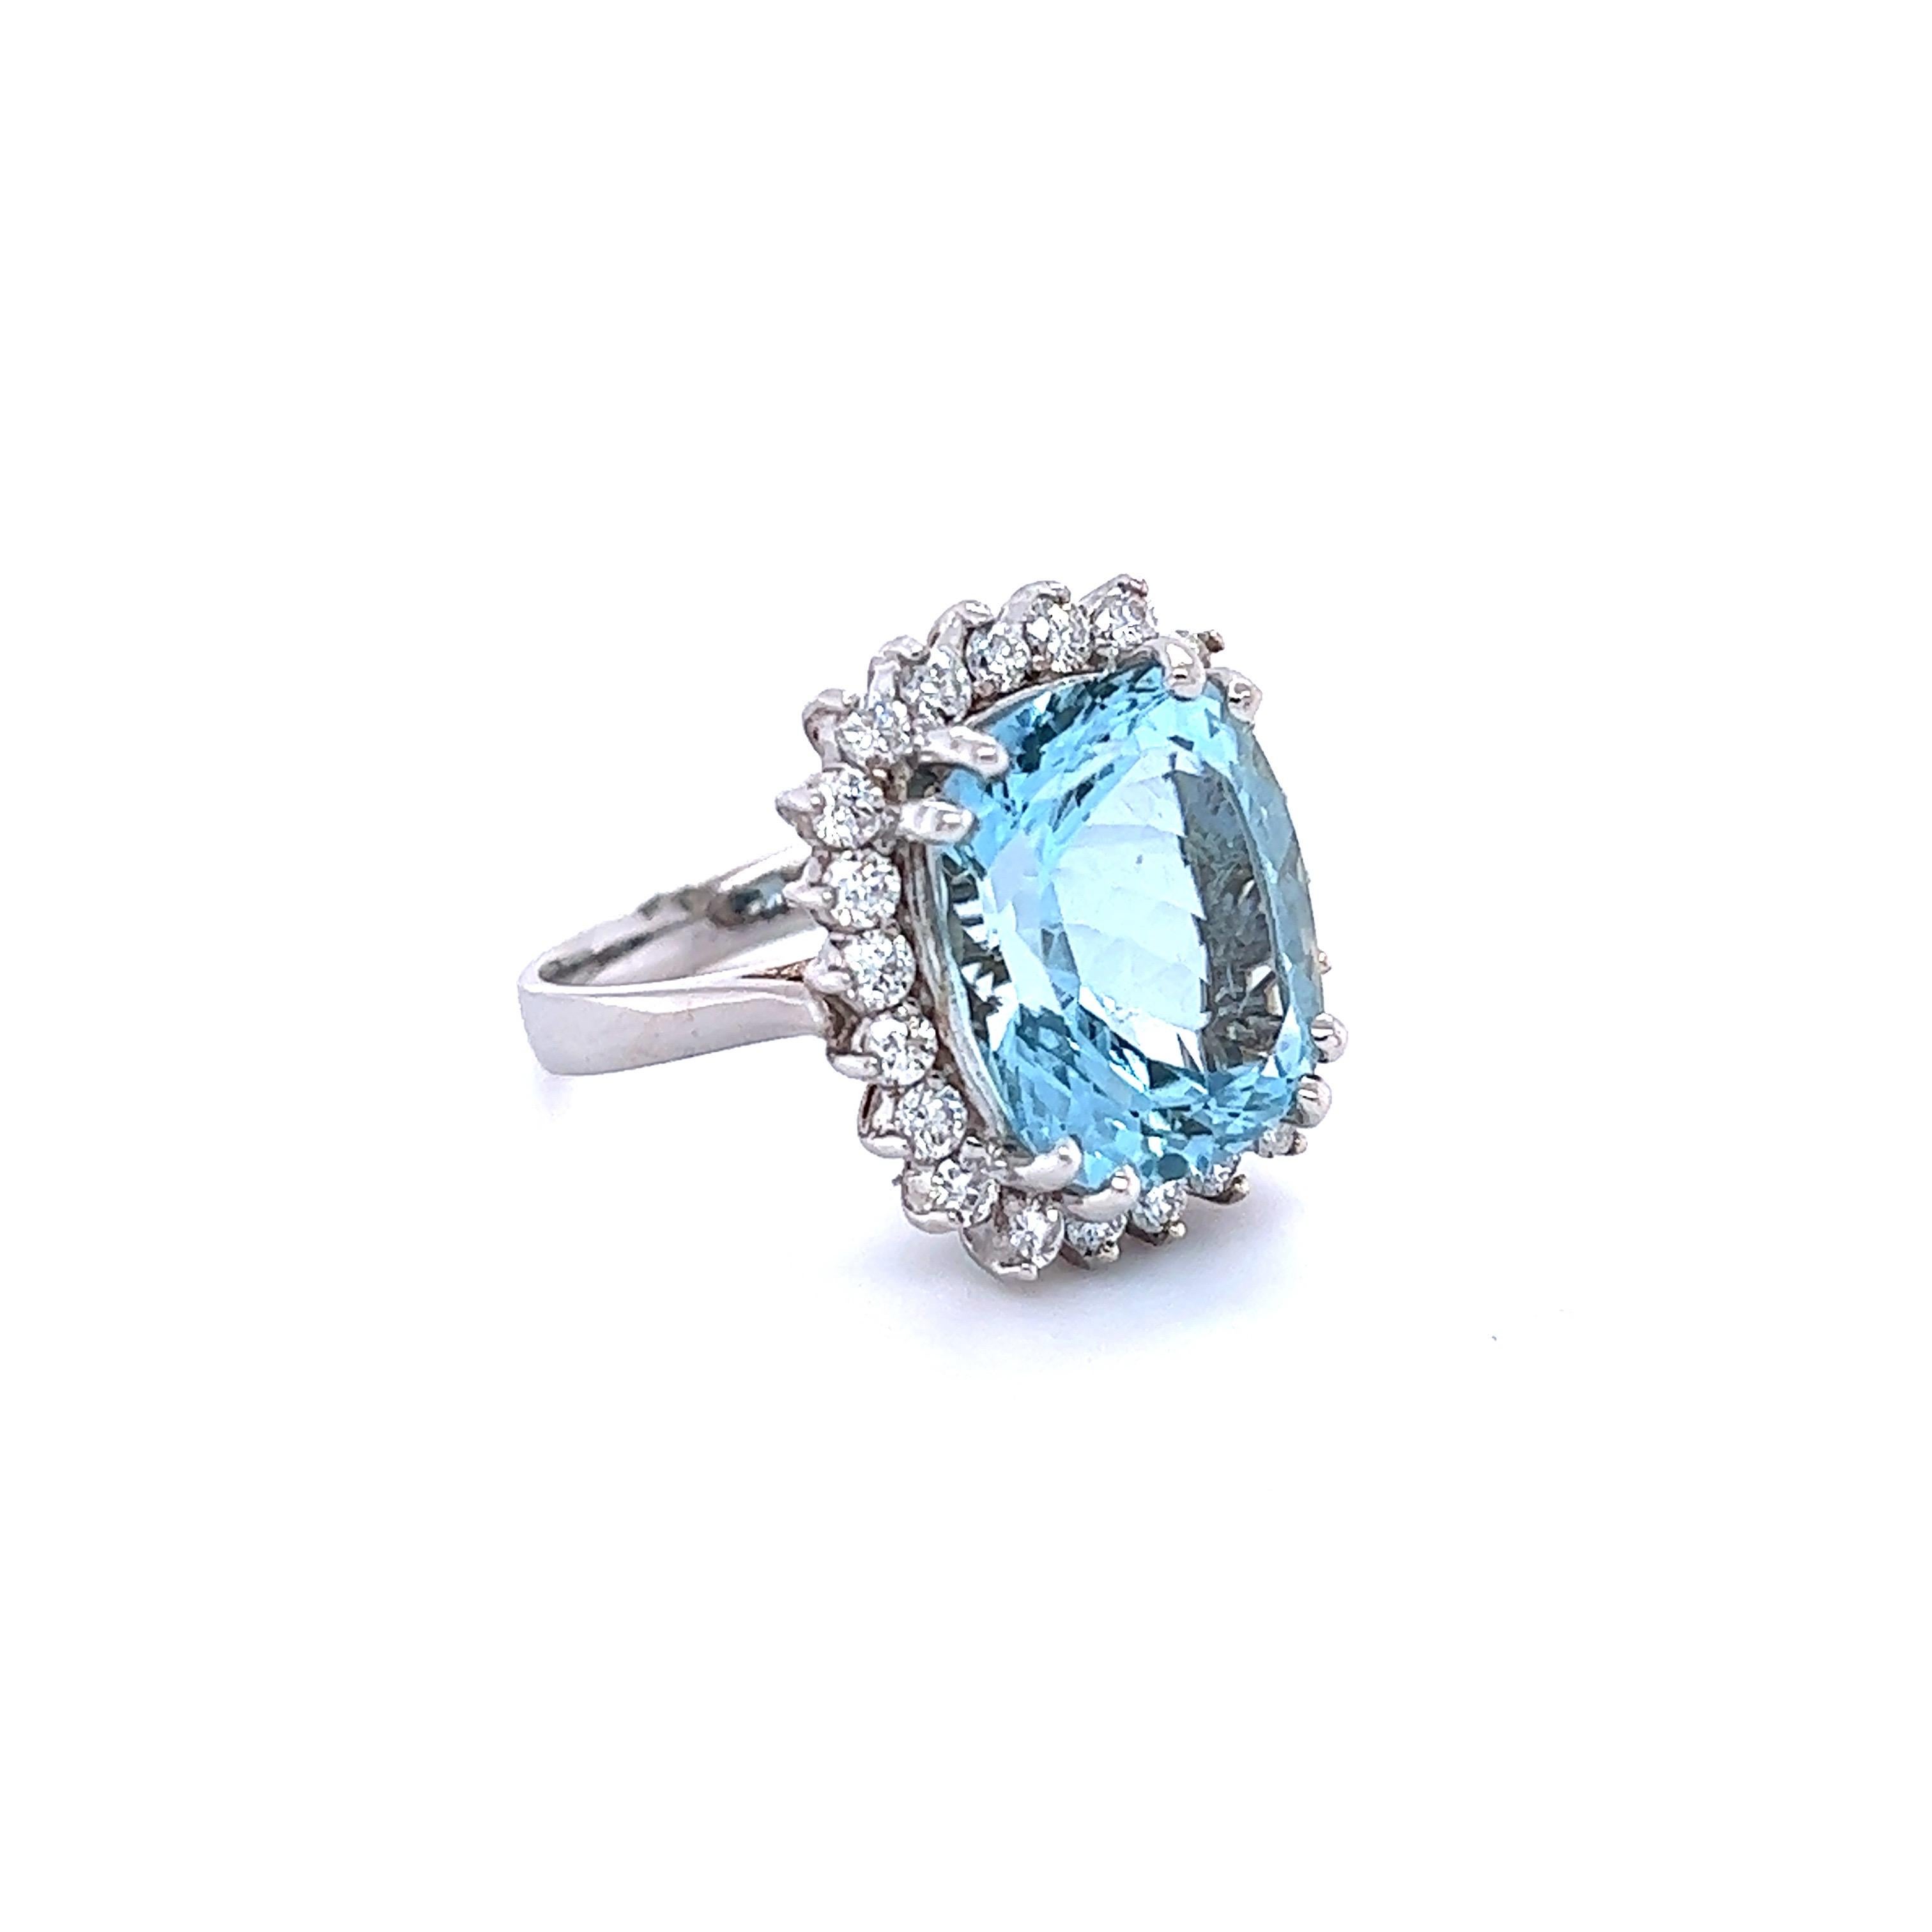 This ring has a 8.75 Carat Cushion-Emerald Cut Aquamarine set in the center of the ring and is surrounded by 22 Round Cut Diamonds that weigh 0.96 carat (Clarity: VS2, Color: F). The total carat weight of this ring is 9.71 carats. 
The Aquamarine